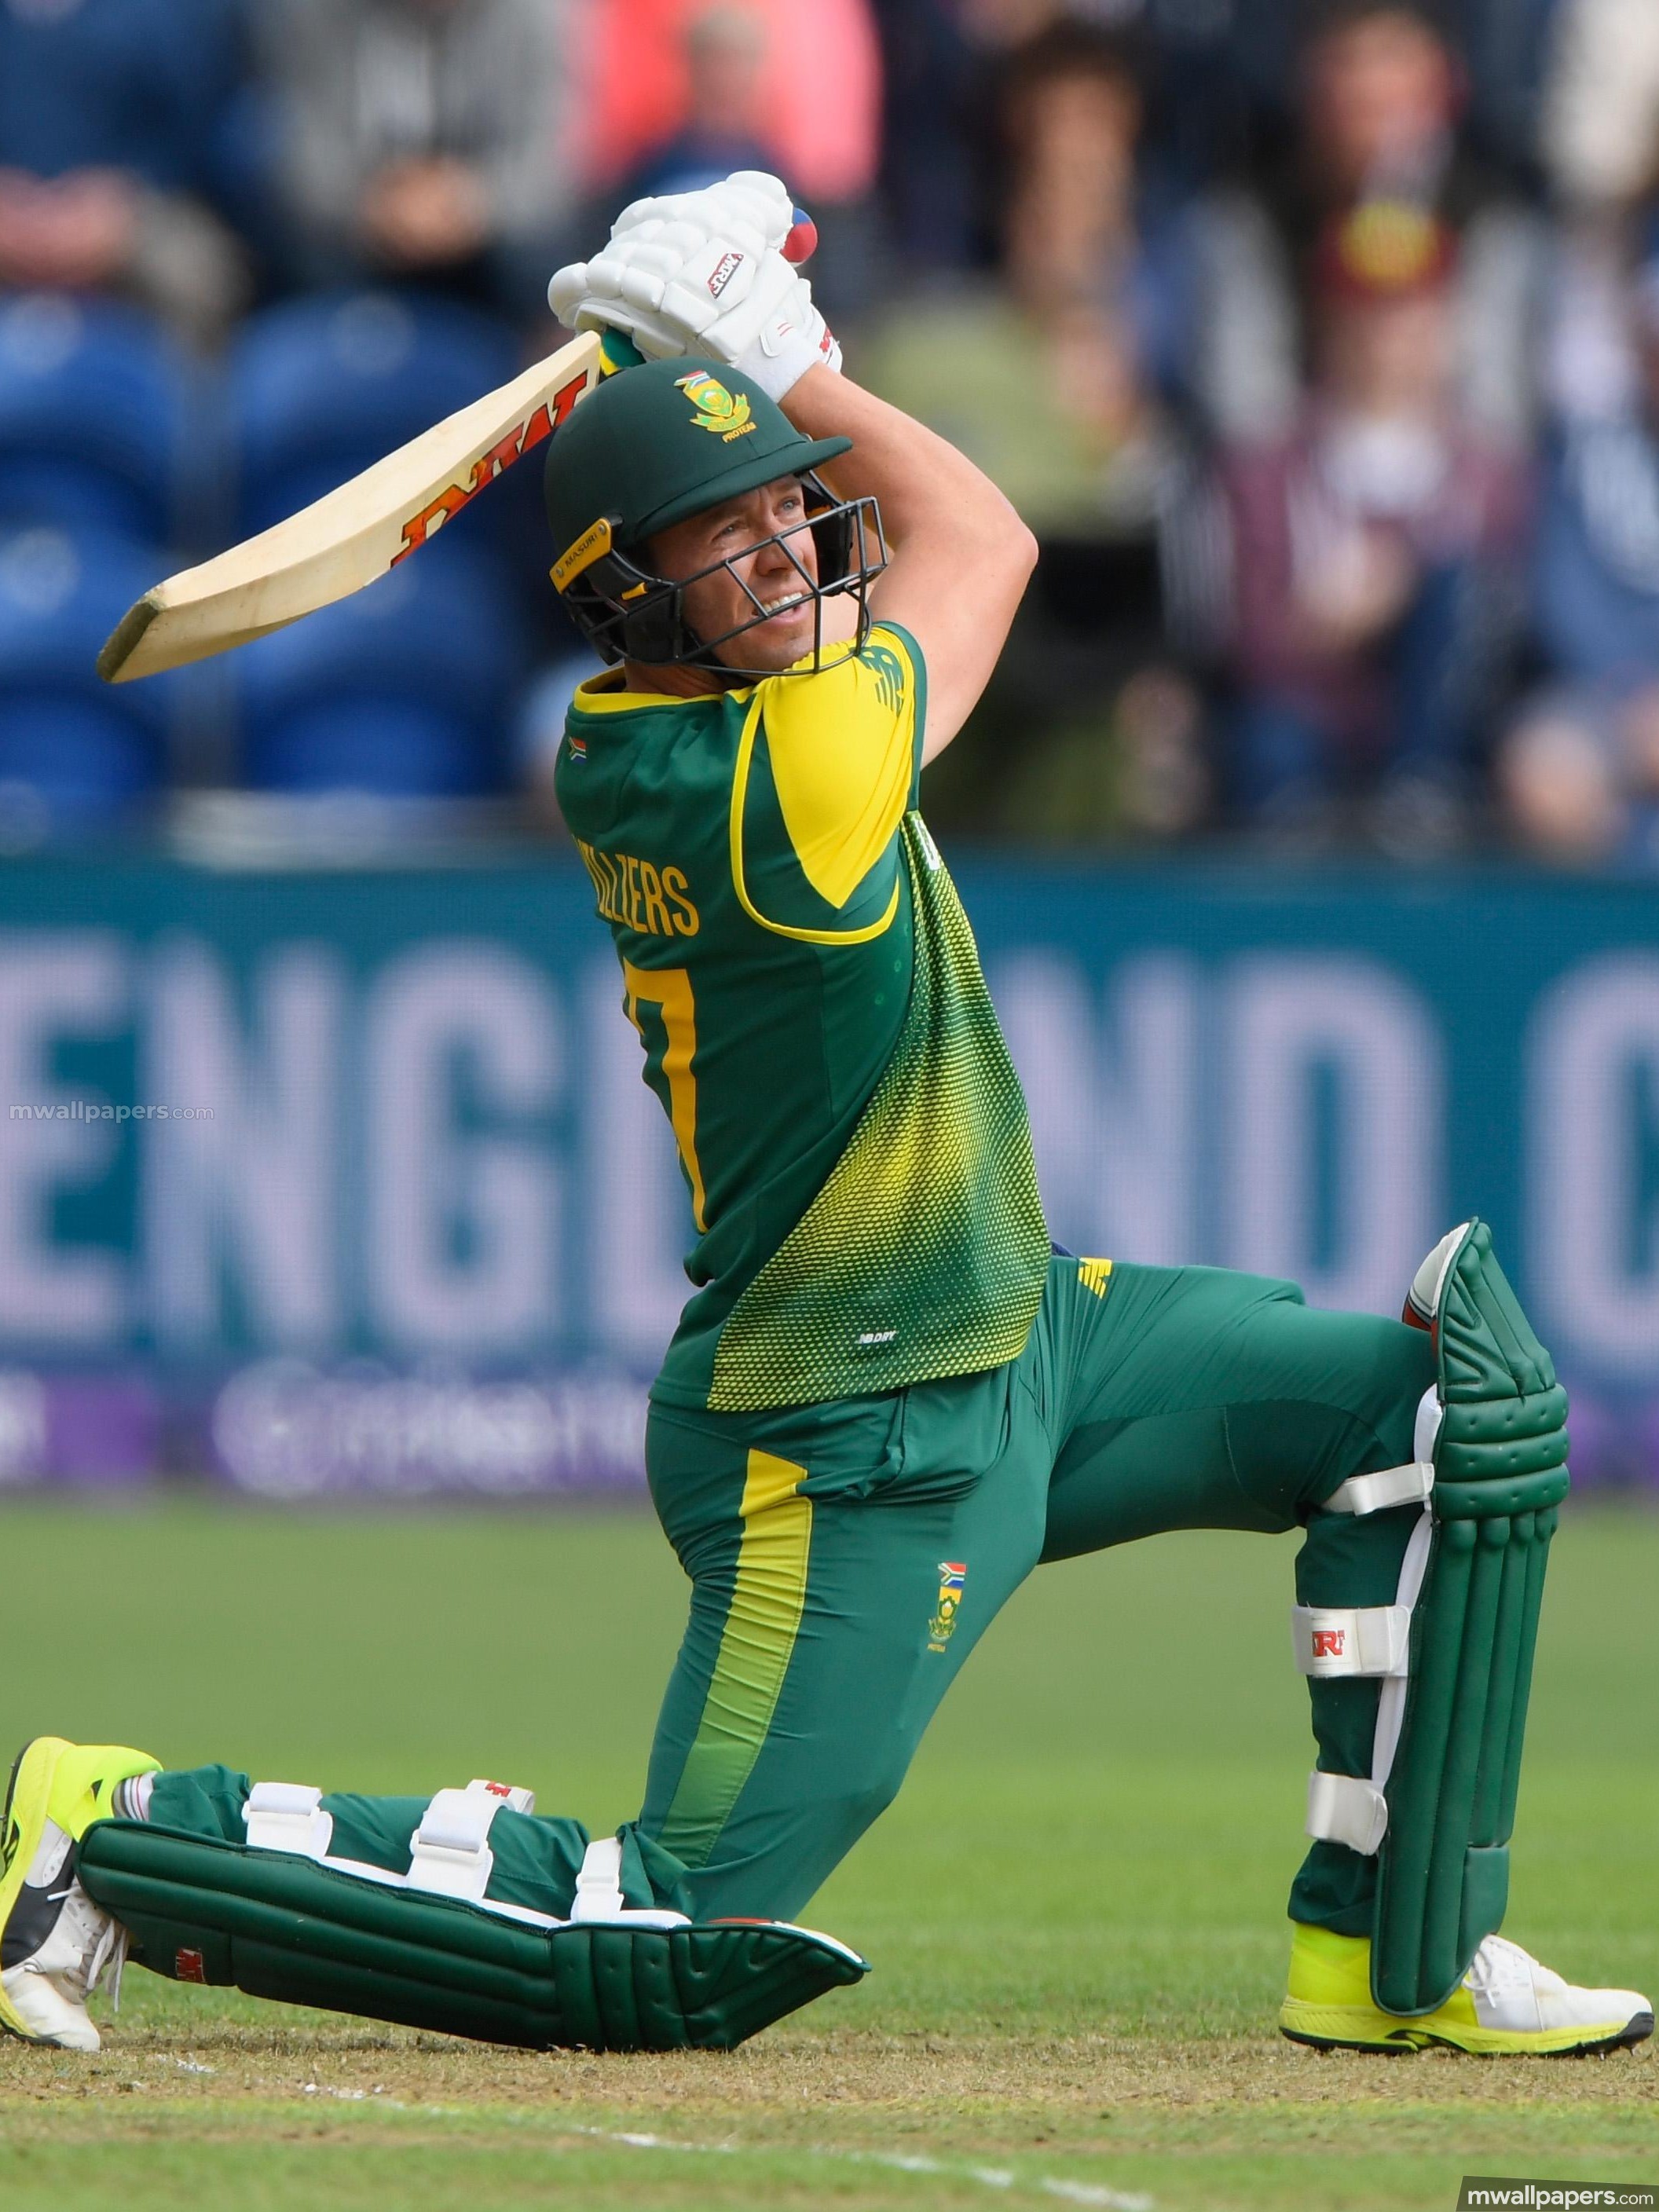 Download As Android/iphone Wallpaper - Ab De Villiers Psl 2019 , HD Wallpaper & Backgrounds